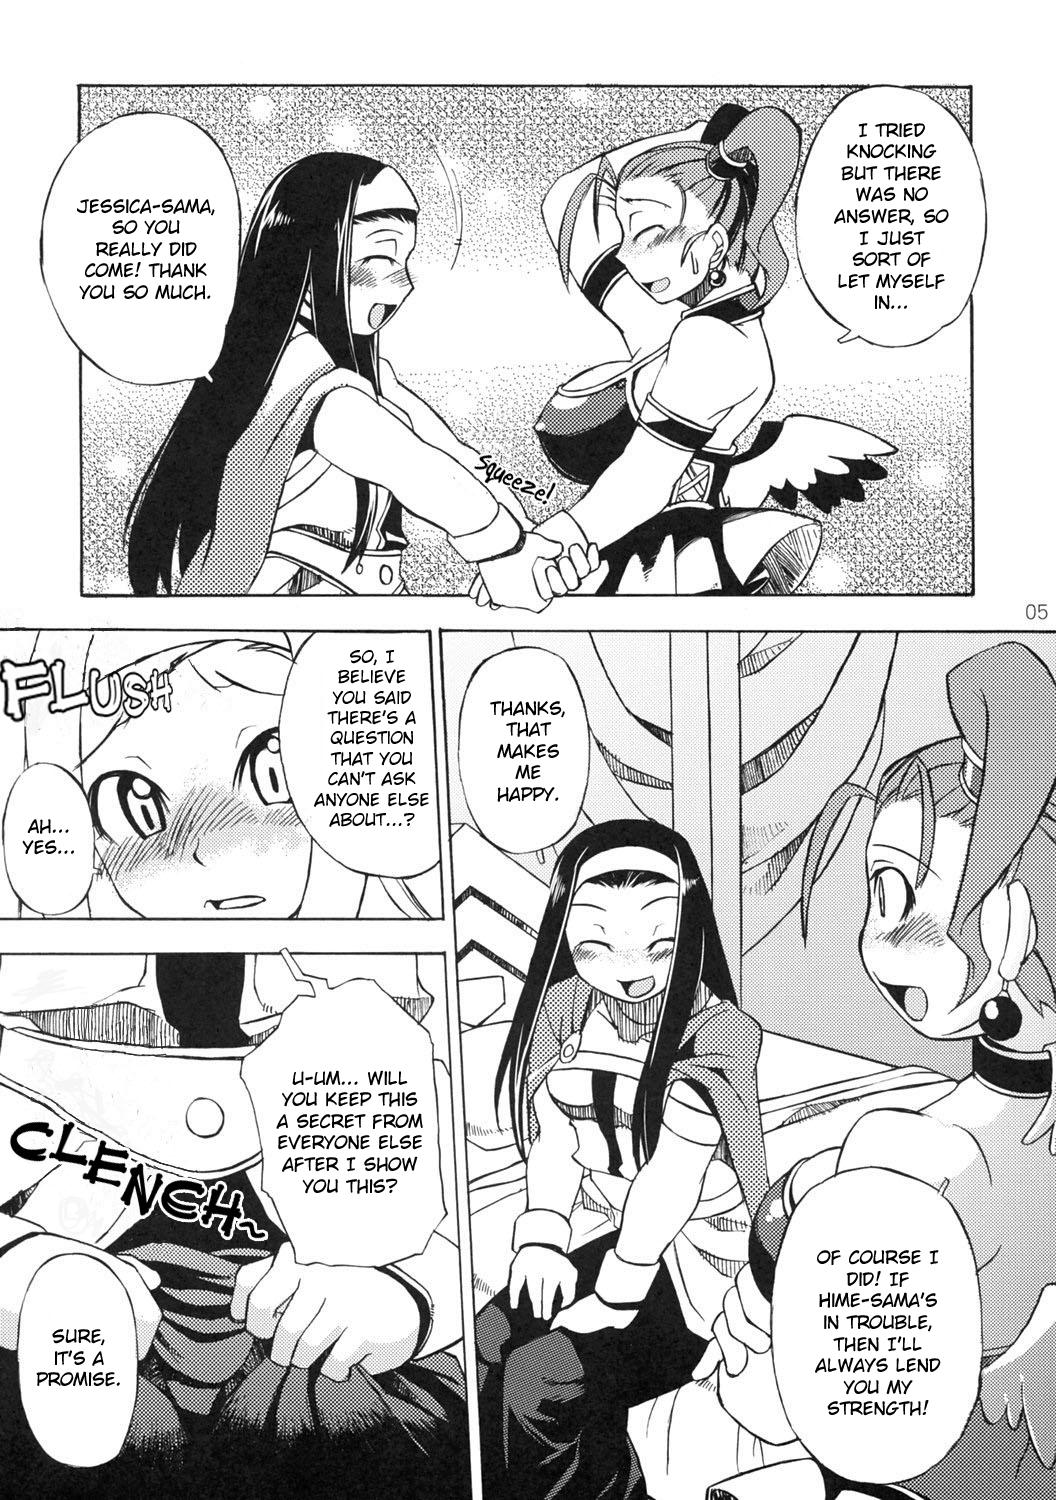 Sexy Oppai Ippai Yume Oppai - Dragon quest viii Gaygroup - Page 4